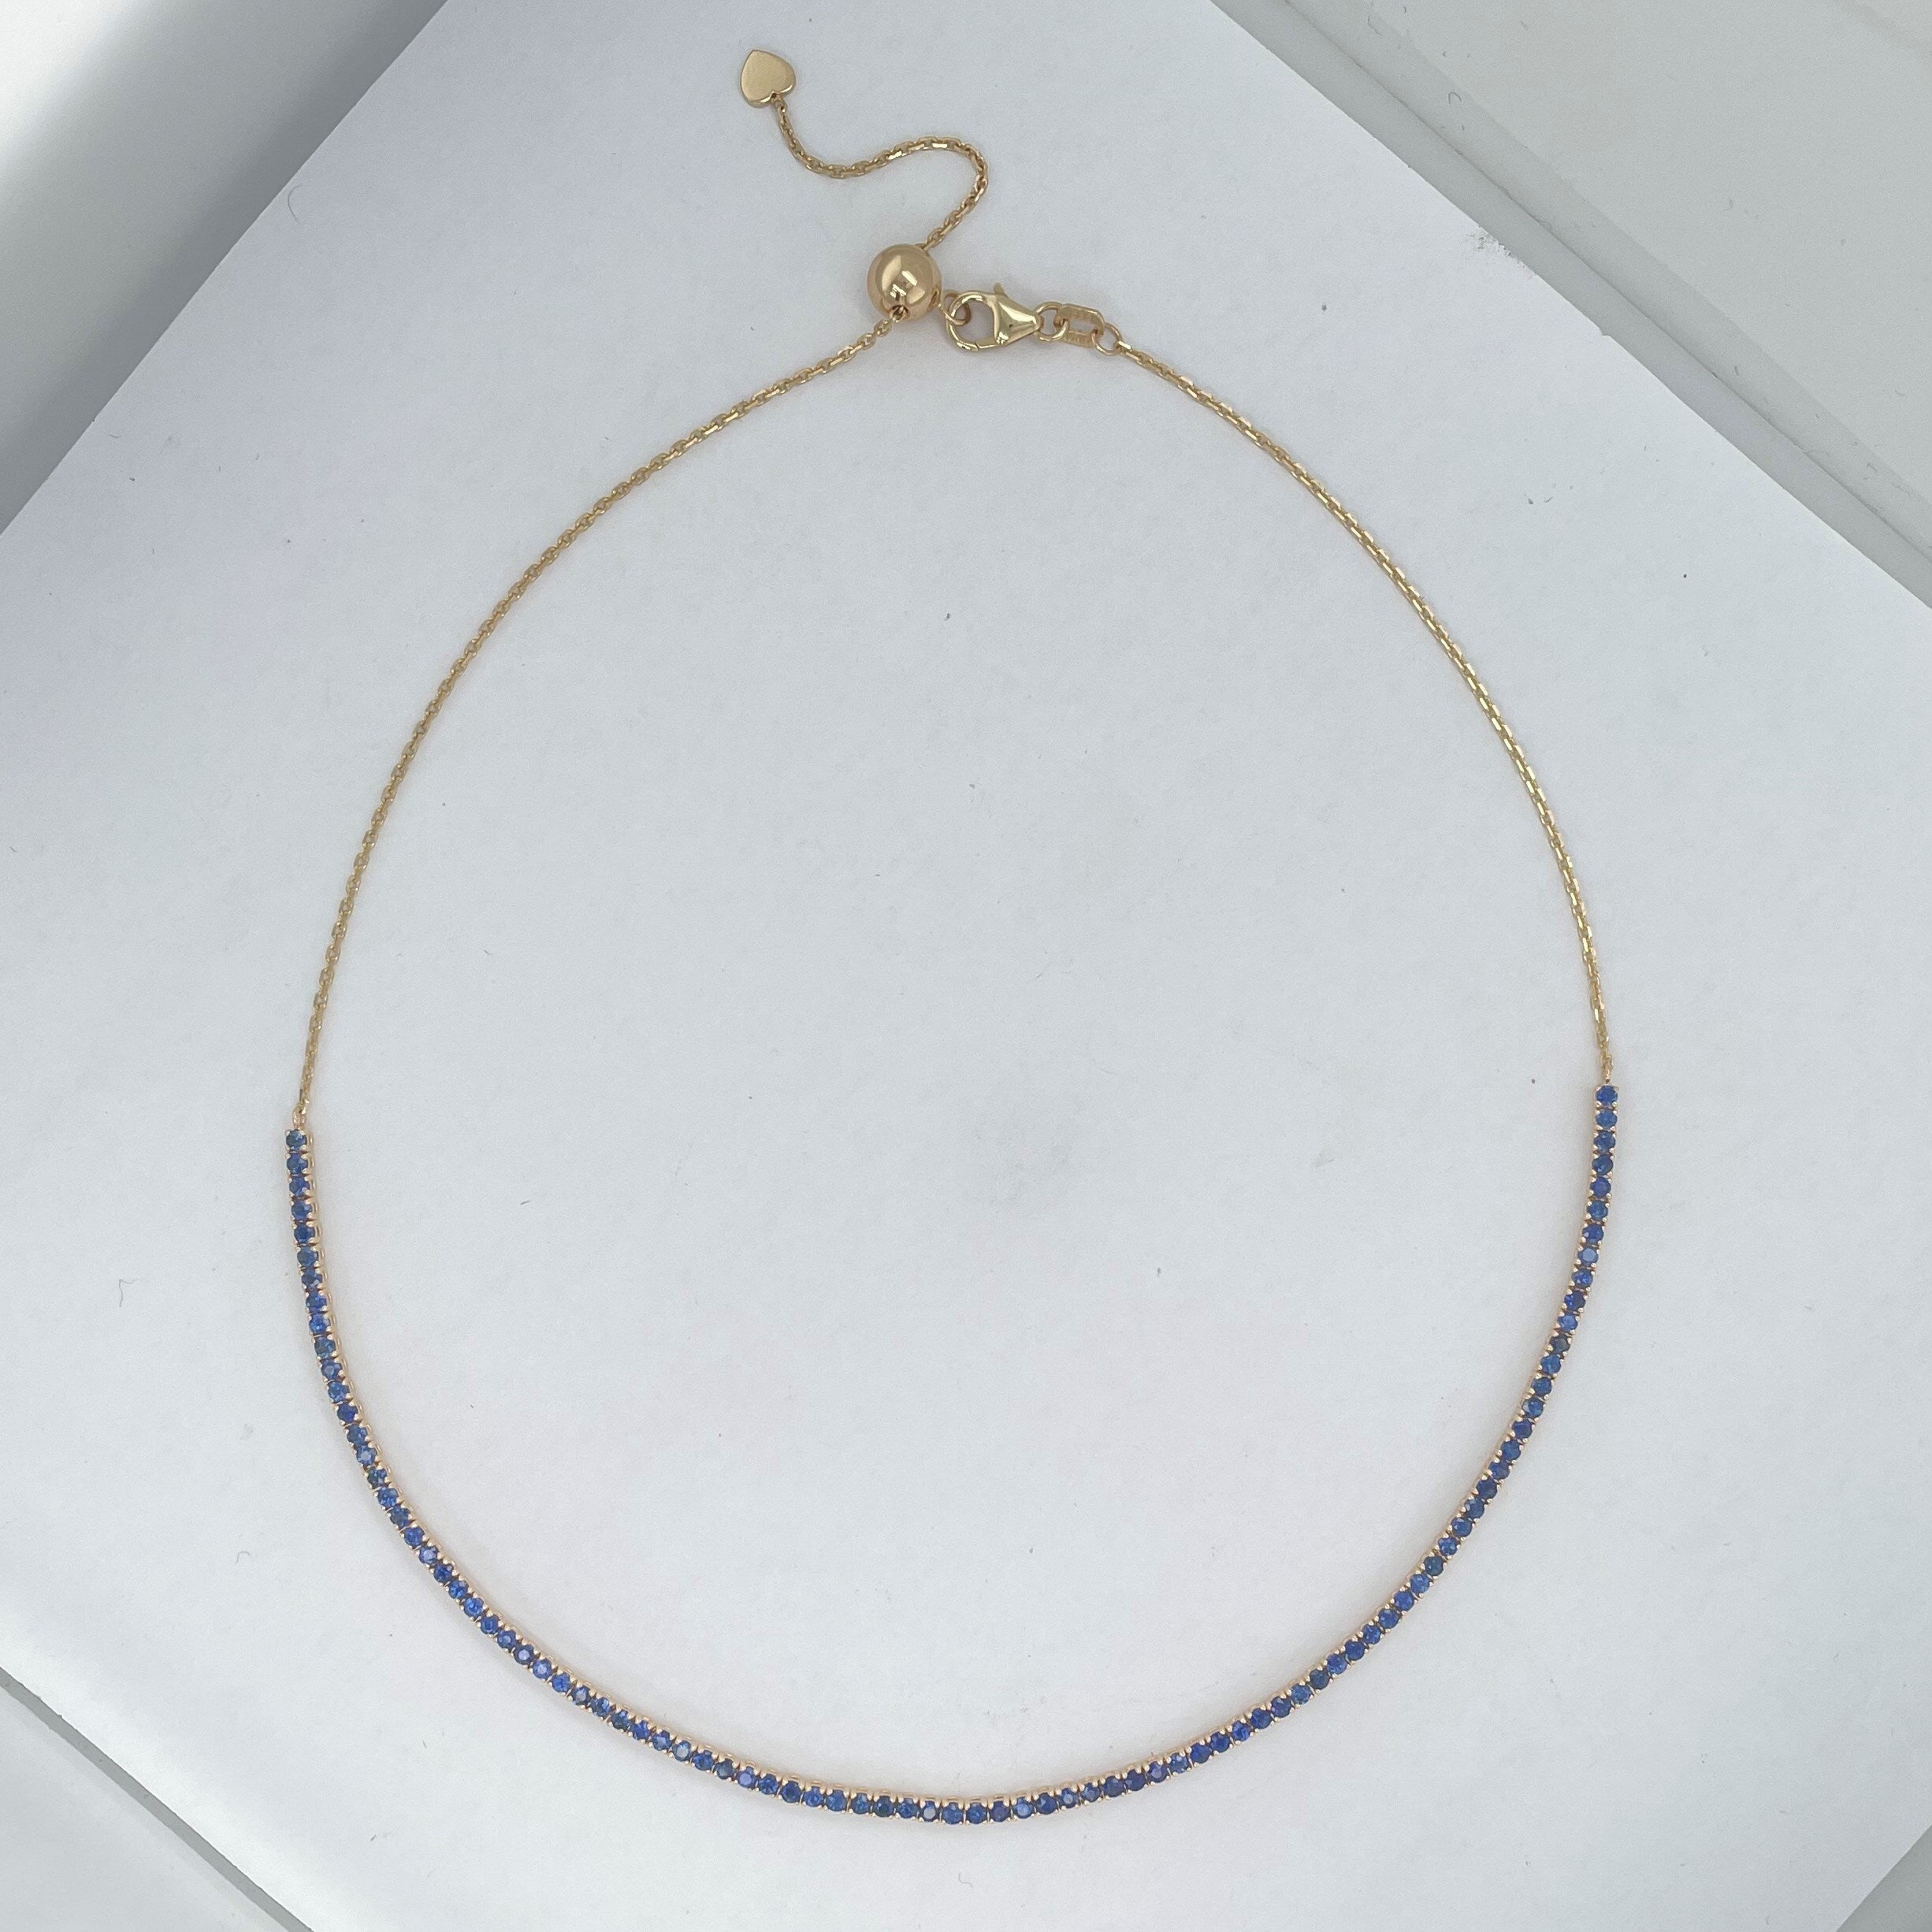 Joelle Sapphire 2.62ct Line Choker Necklace 14K Yellow Gold for Her Ad ...